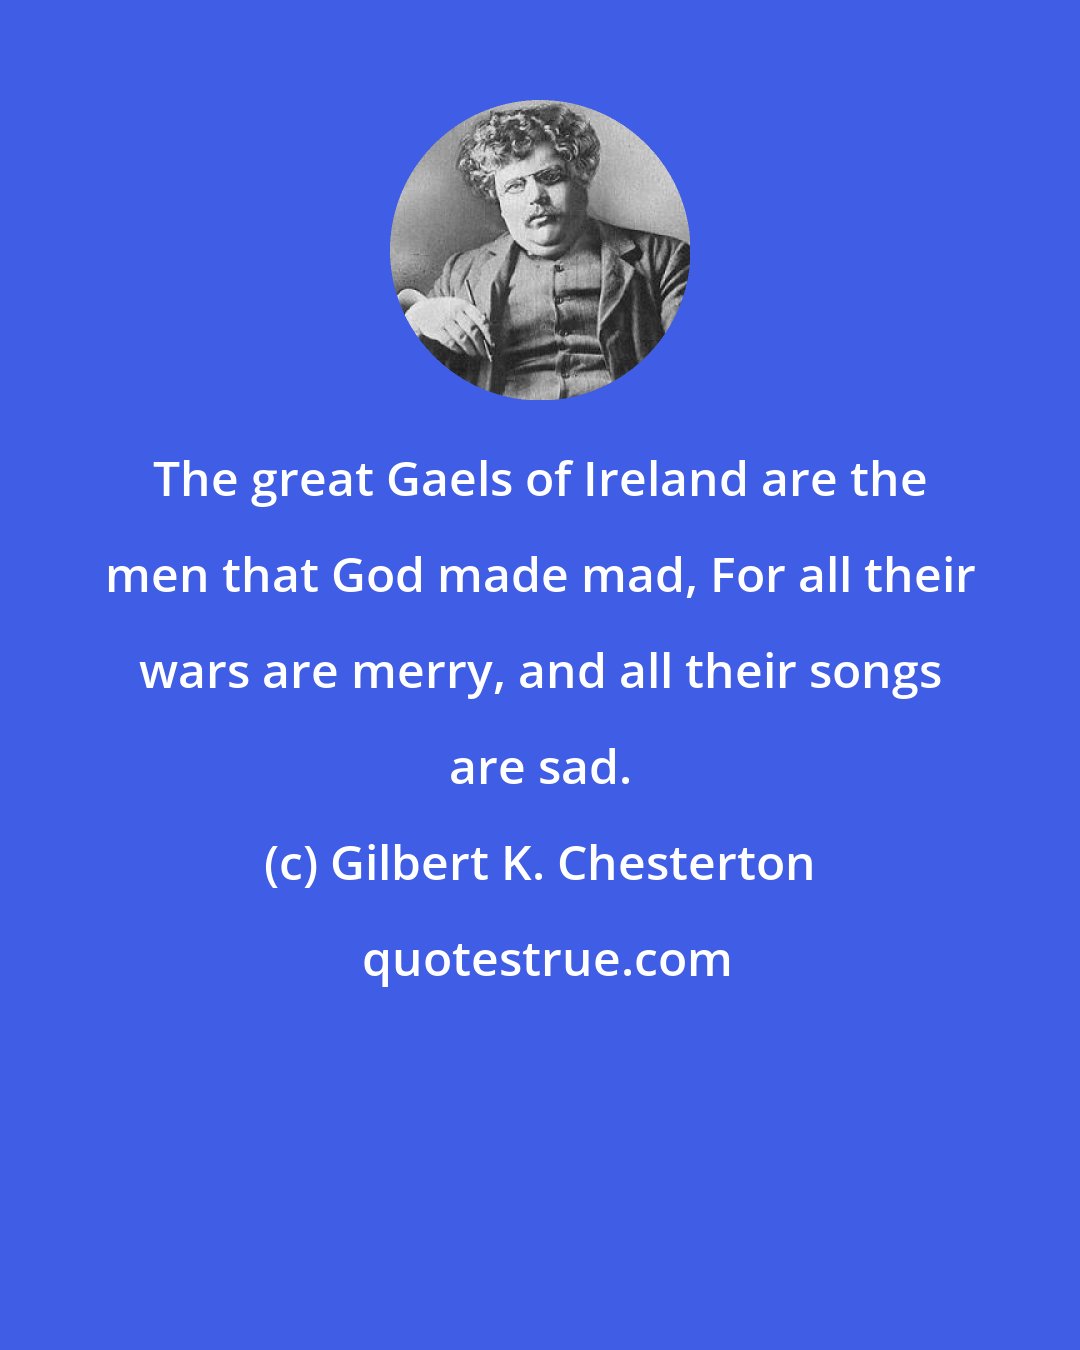 Gilbert K. Chesterton: The great Gaels of Ireland are the men that God made mad, For all their wars are merry, and all their songs are sad.